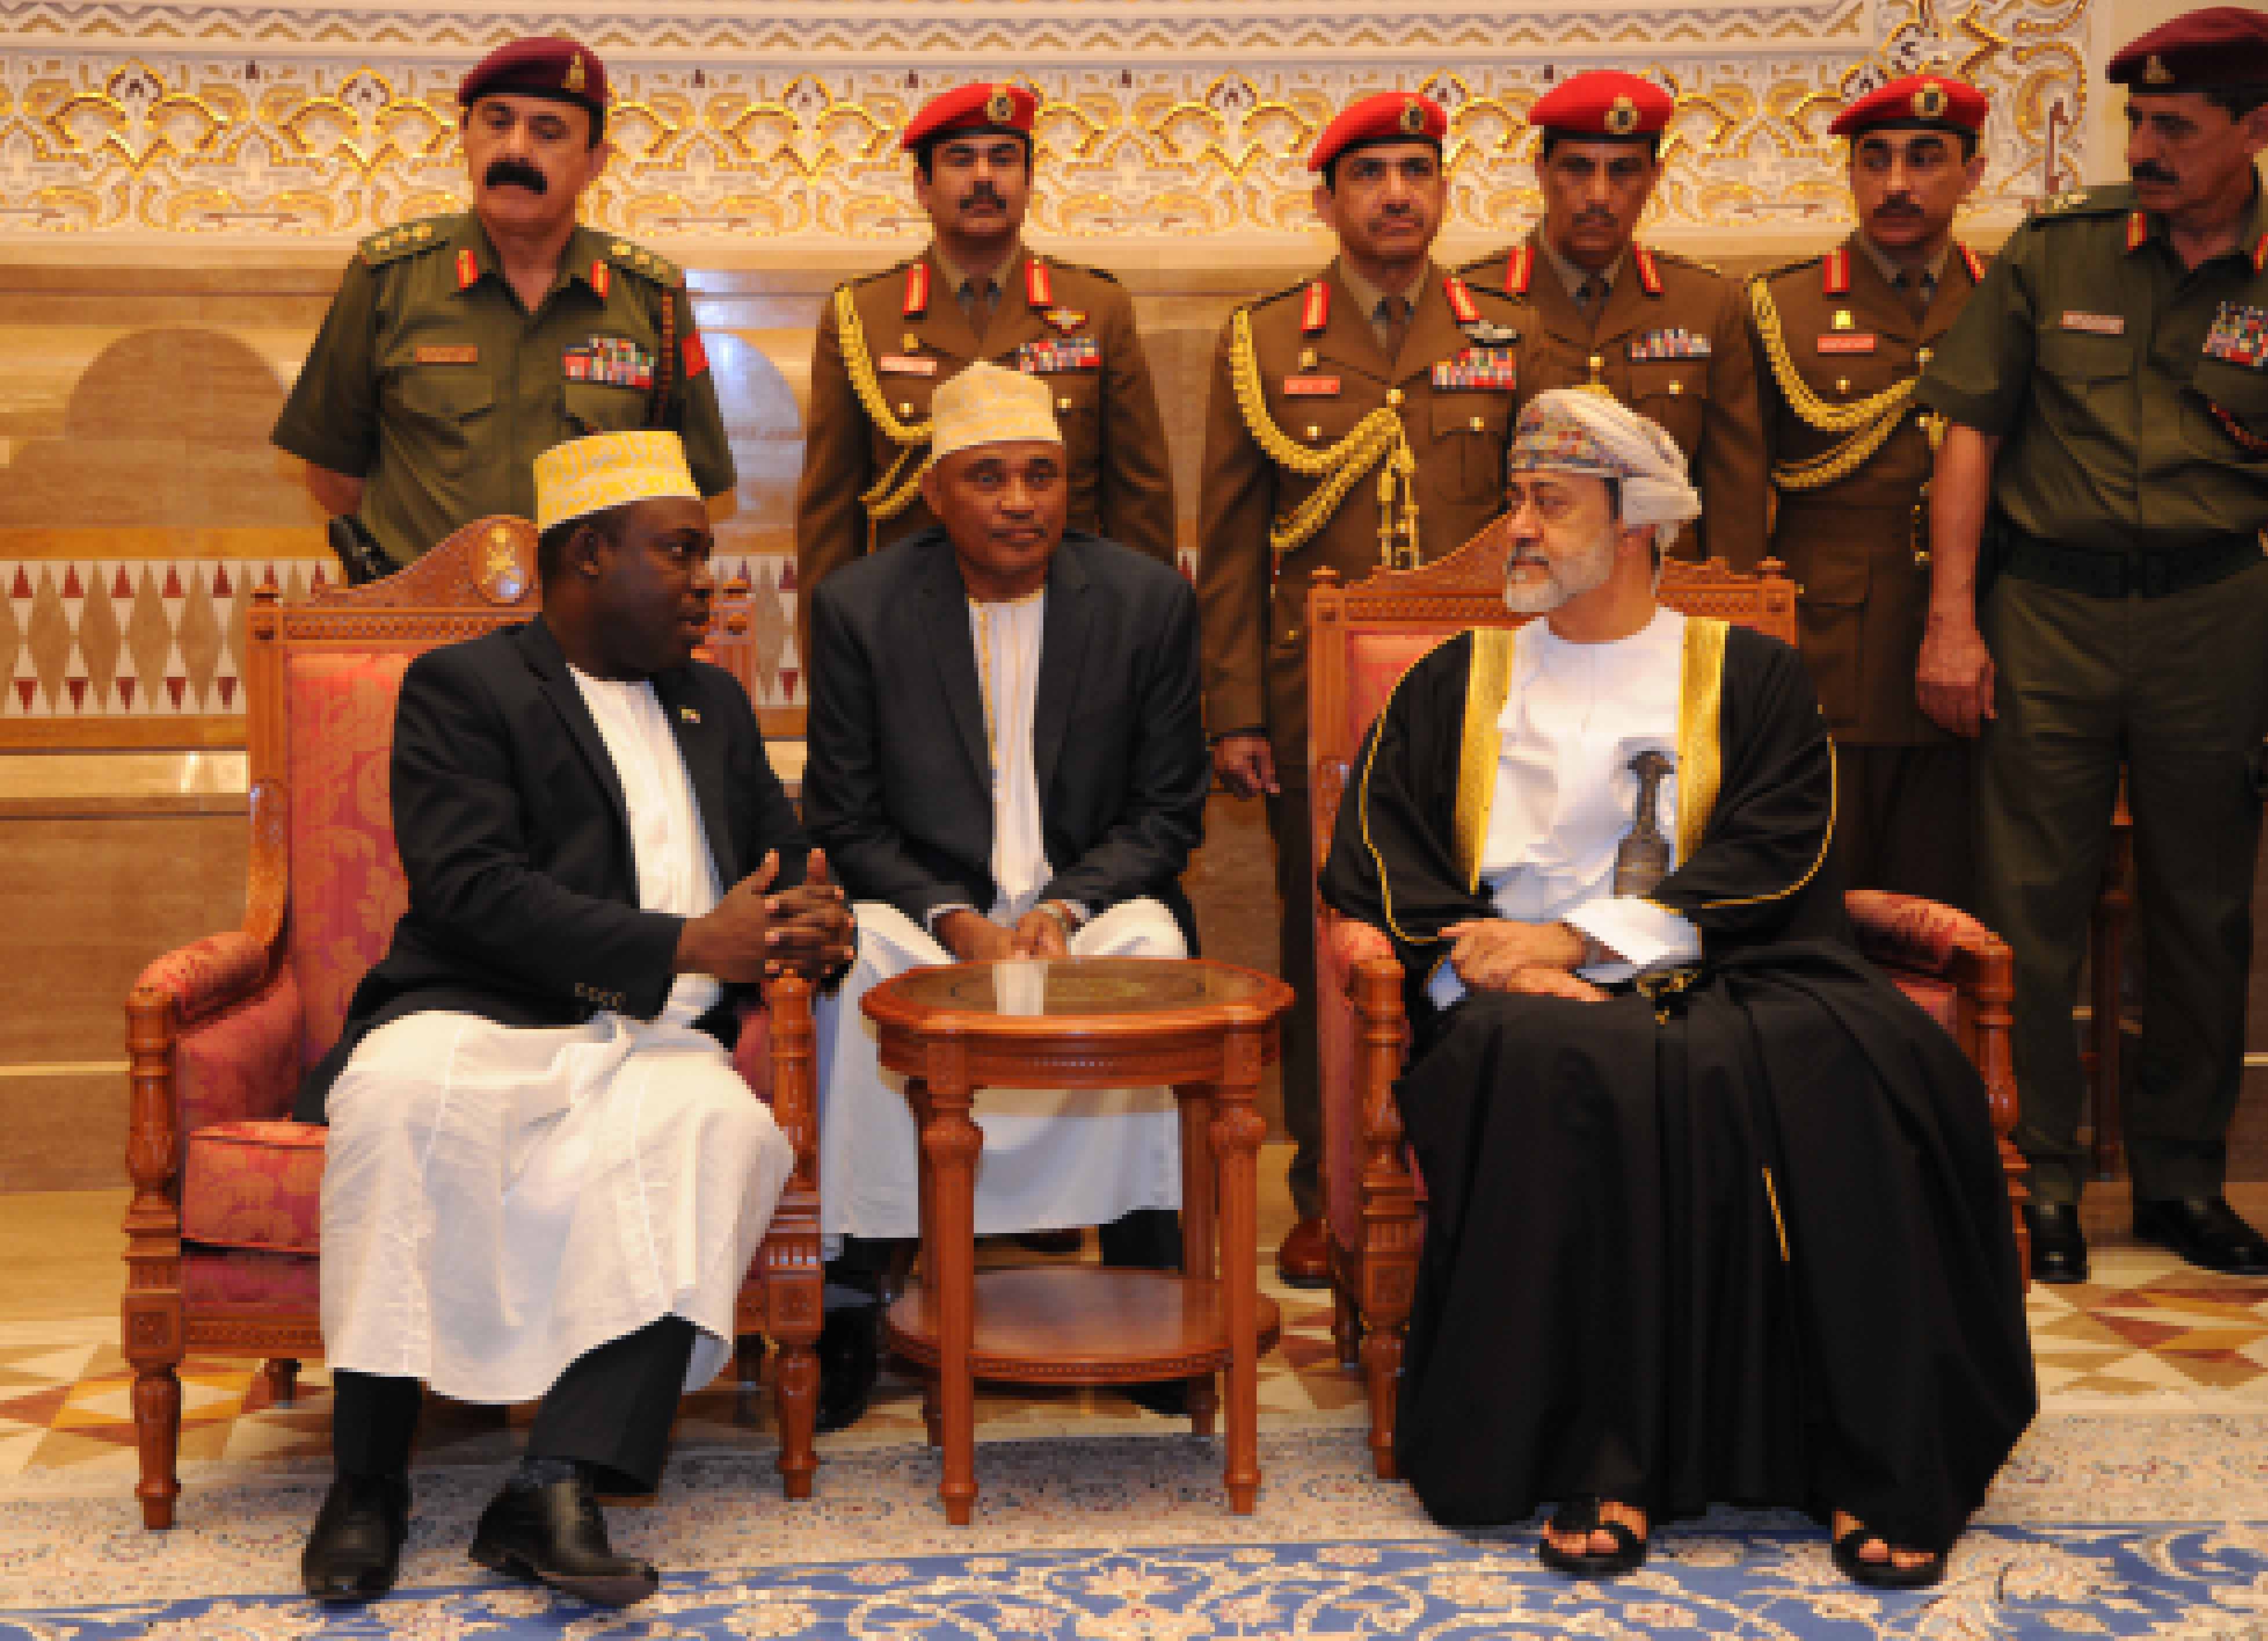 Ministerial envoy from Comoros arrives in Oman